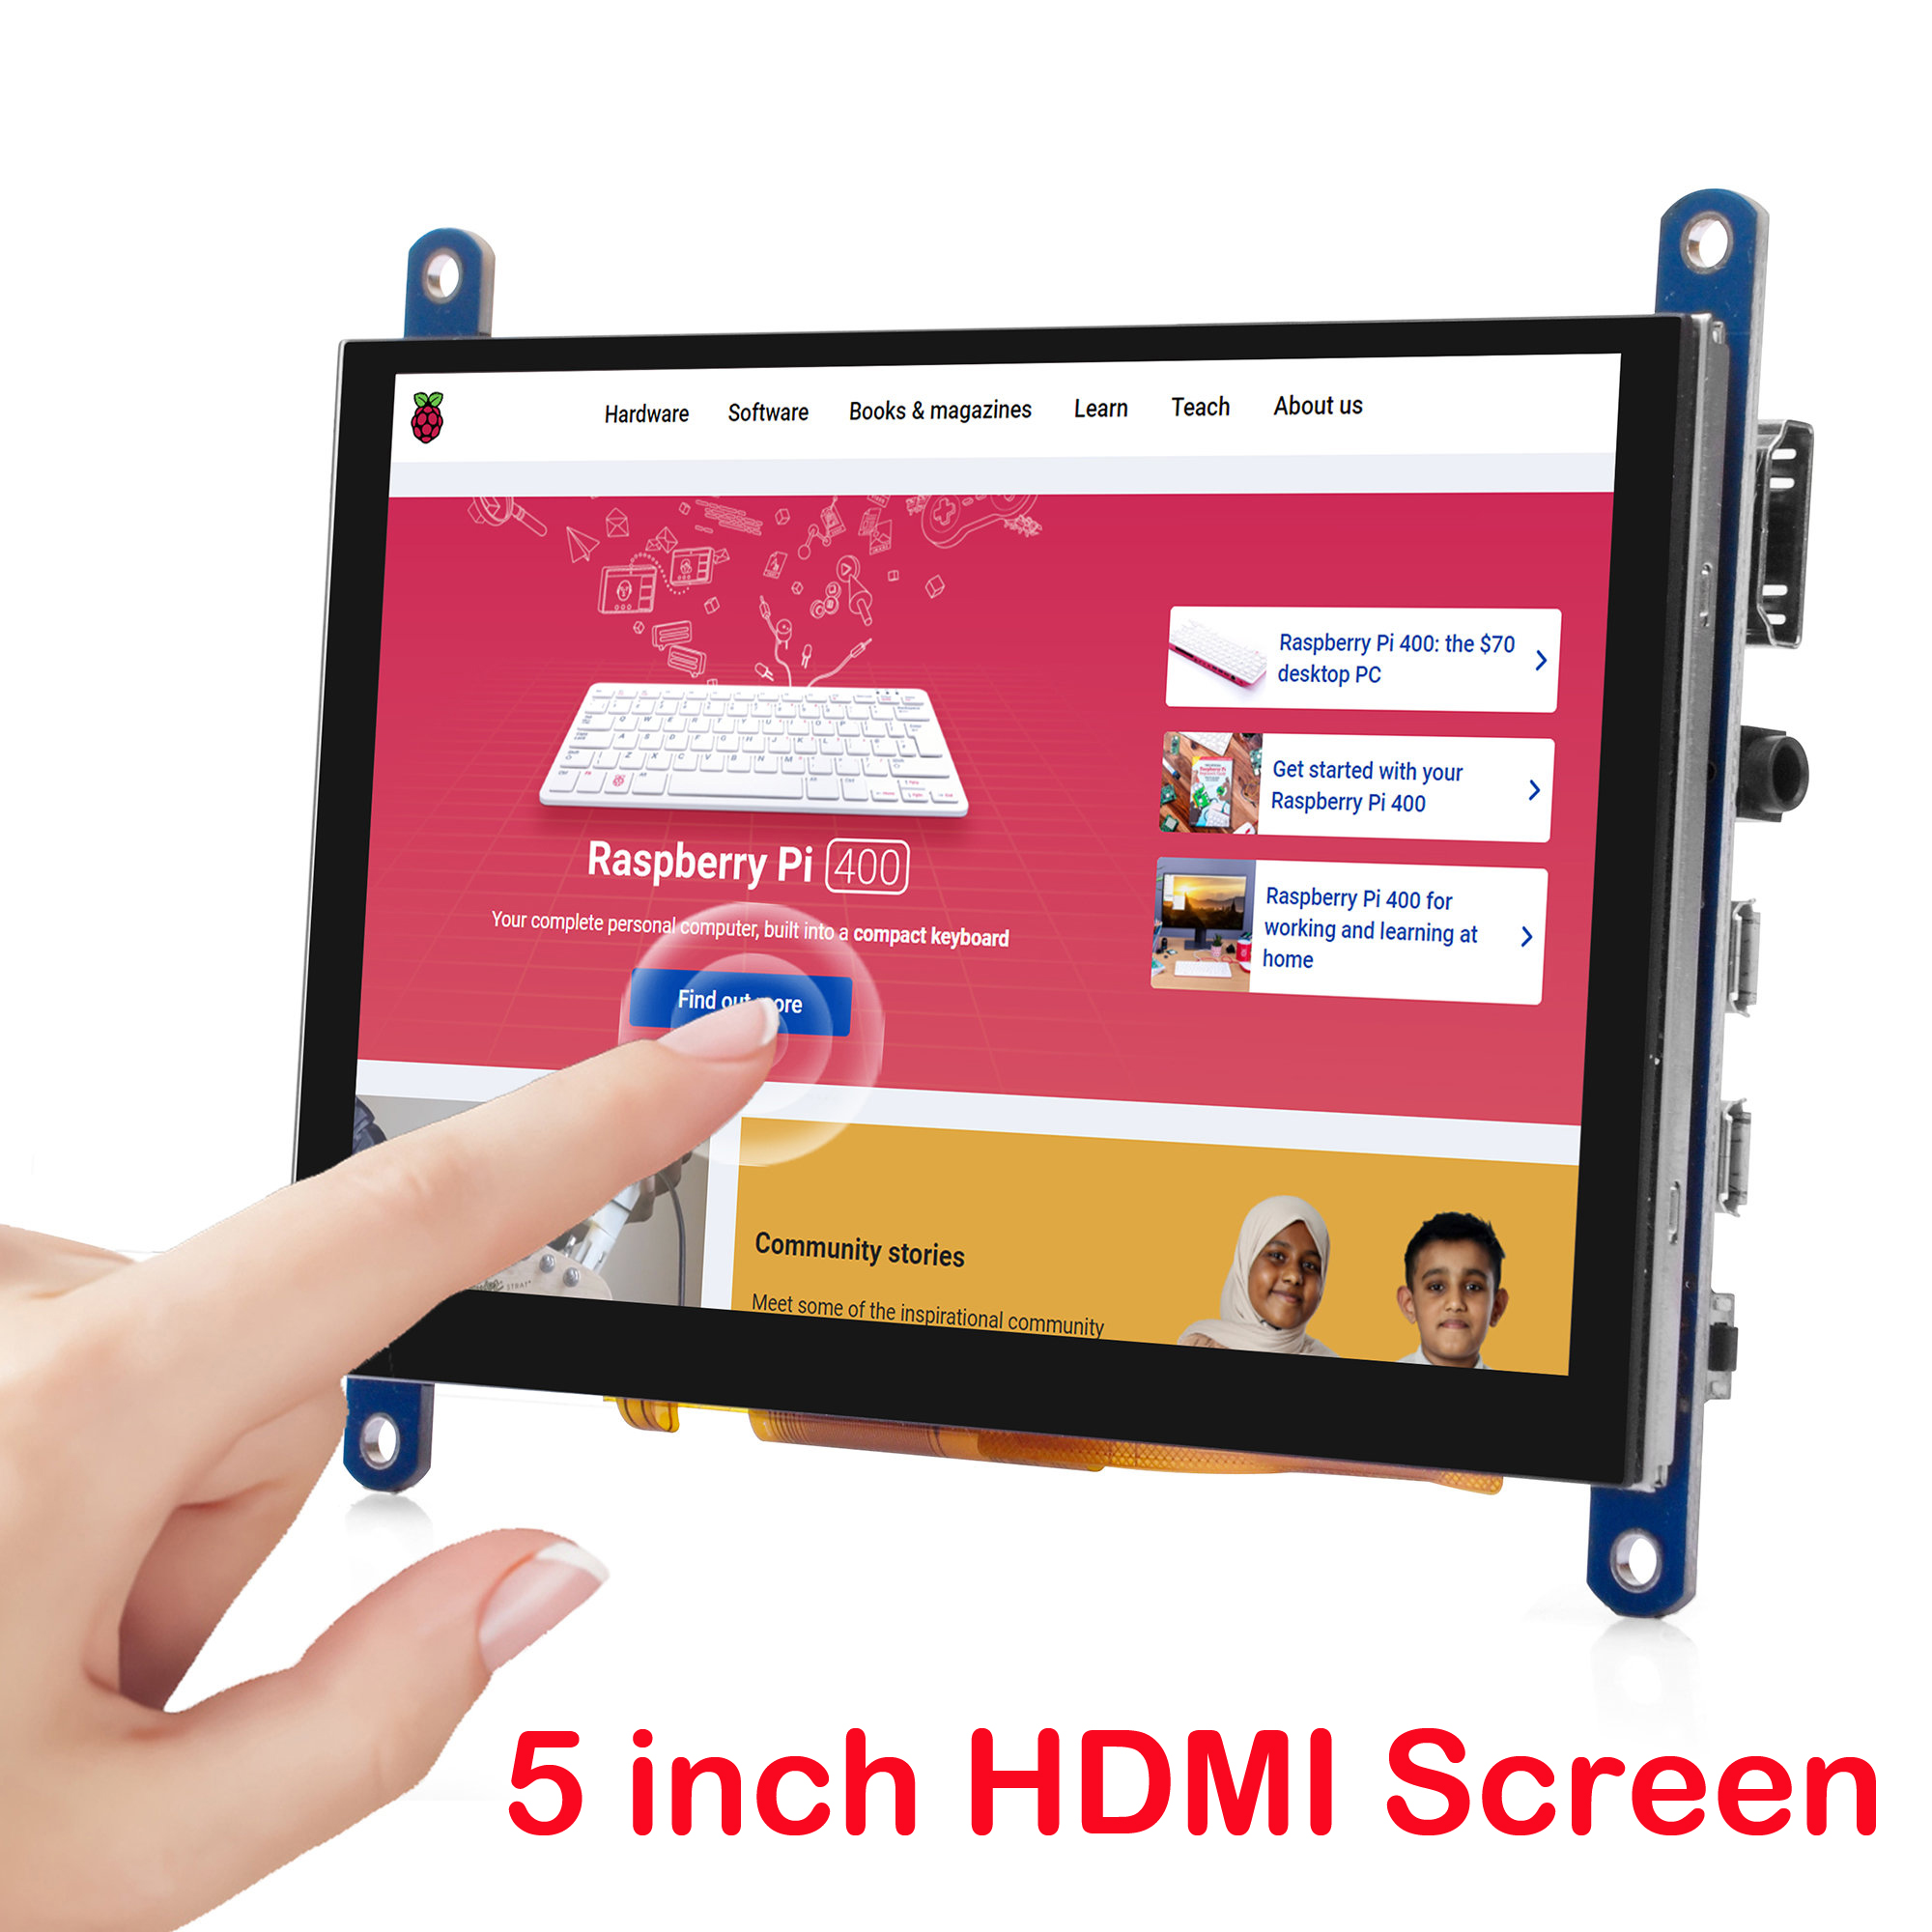 OSOYOO 5 inch HDMI 800 x 480 Capacitive Touch LCD Display (SKU: 2021007700)